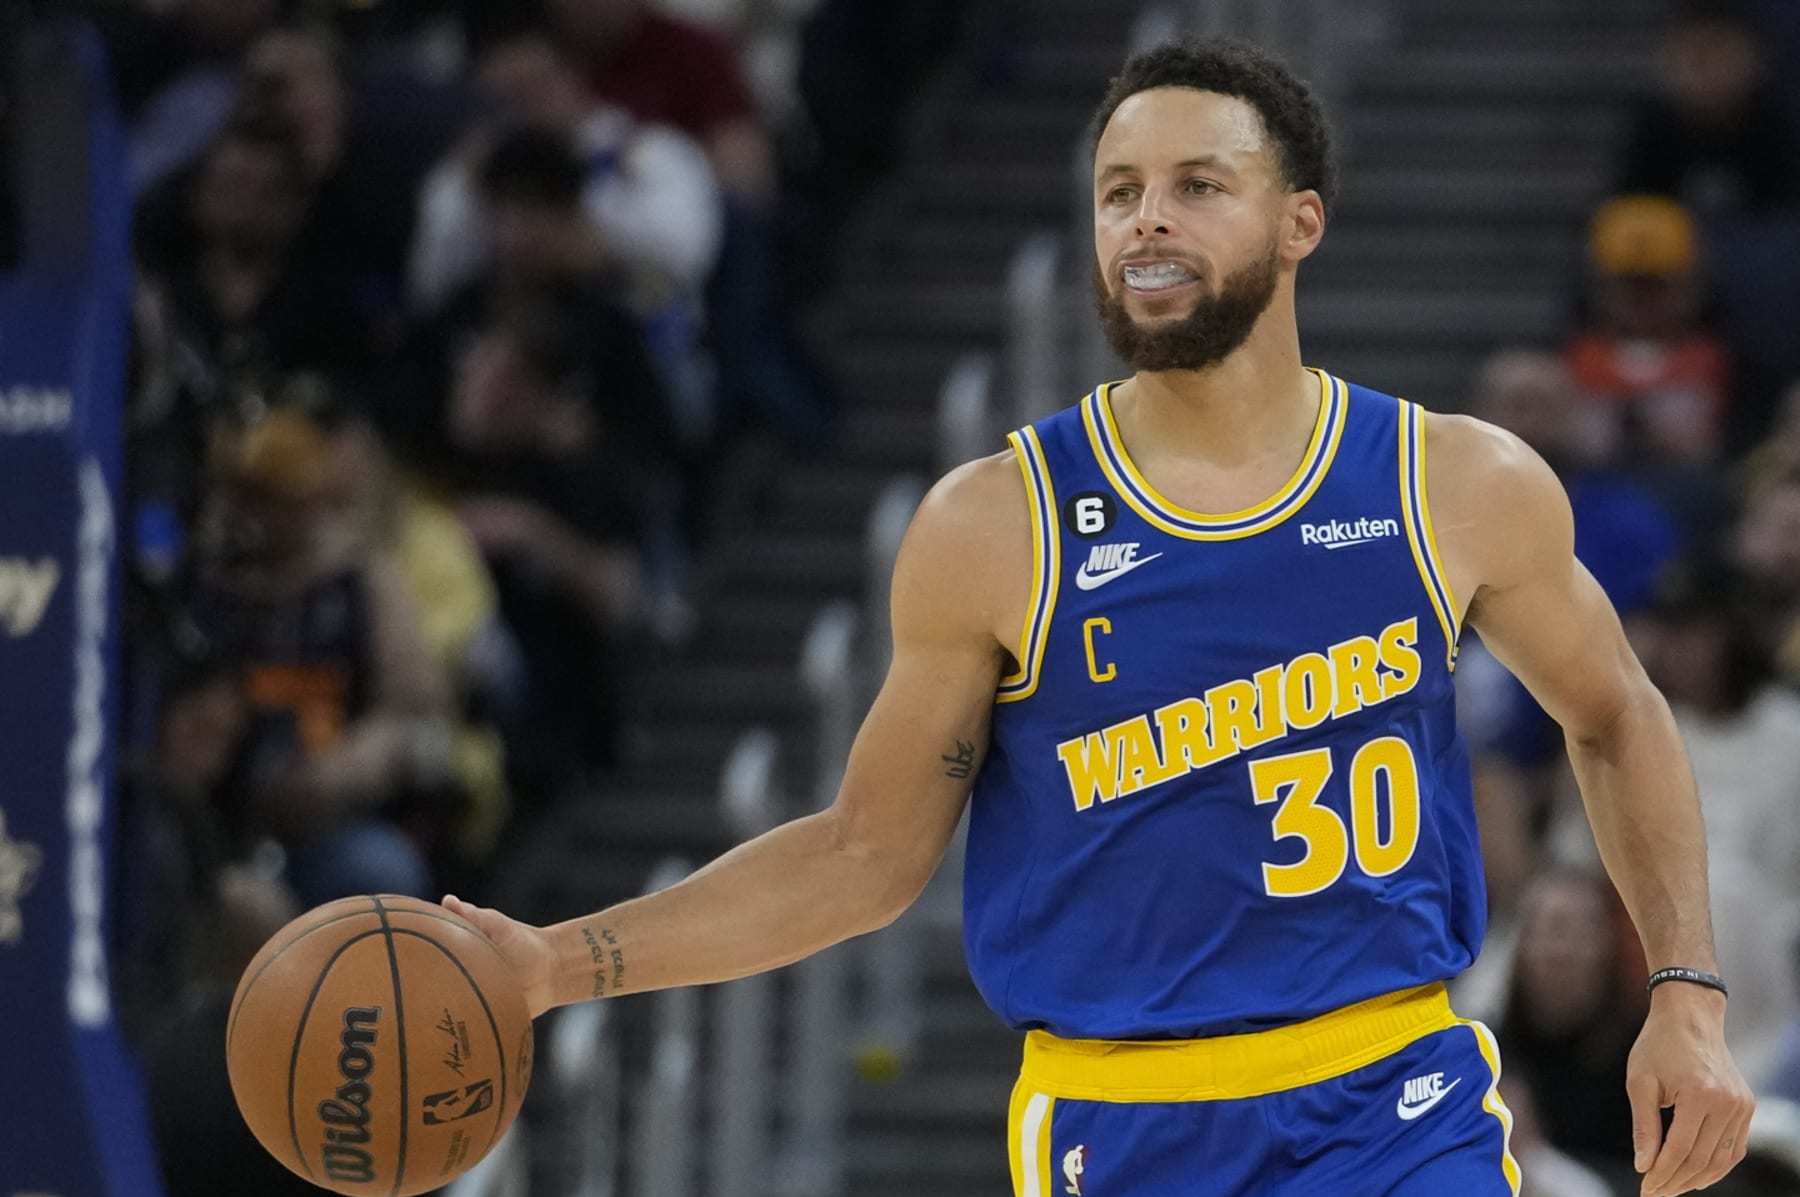 Warriors star Steph Curry named NBA All-Star Game starter